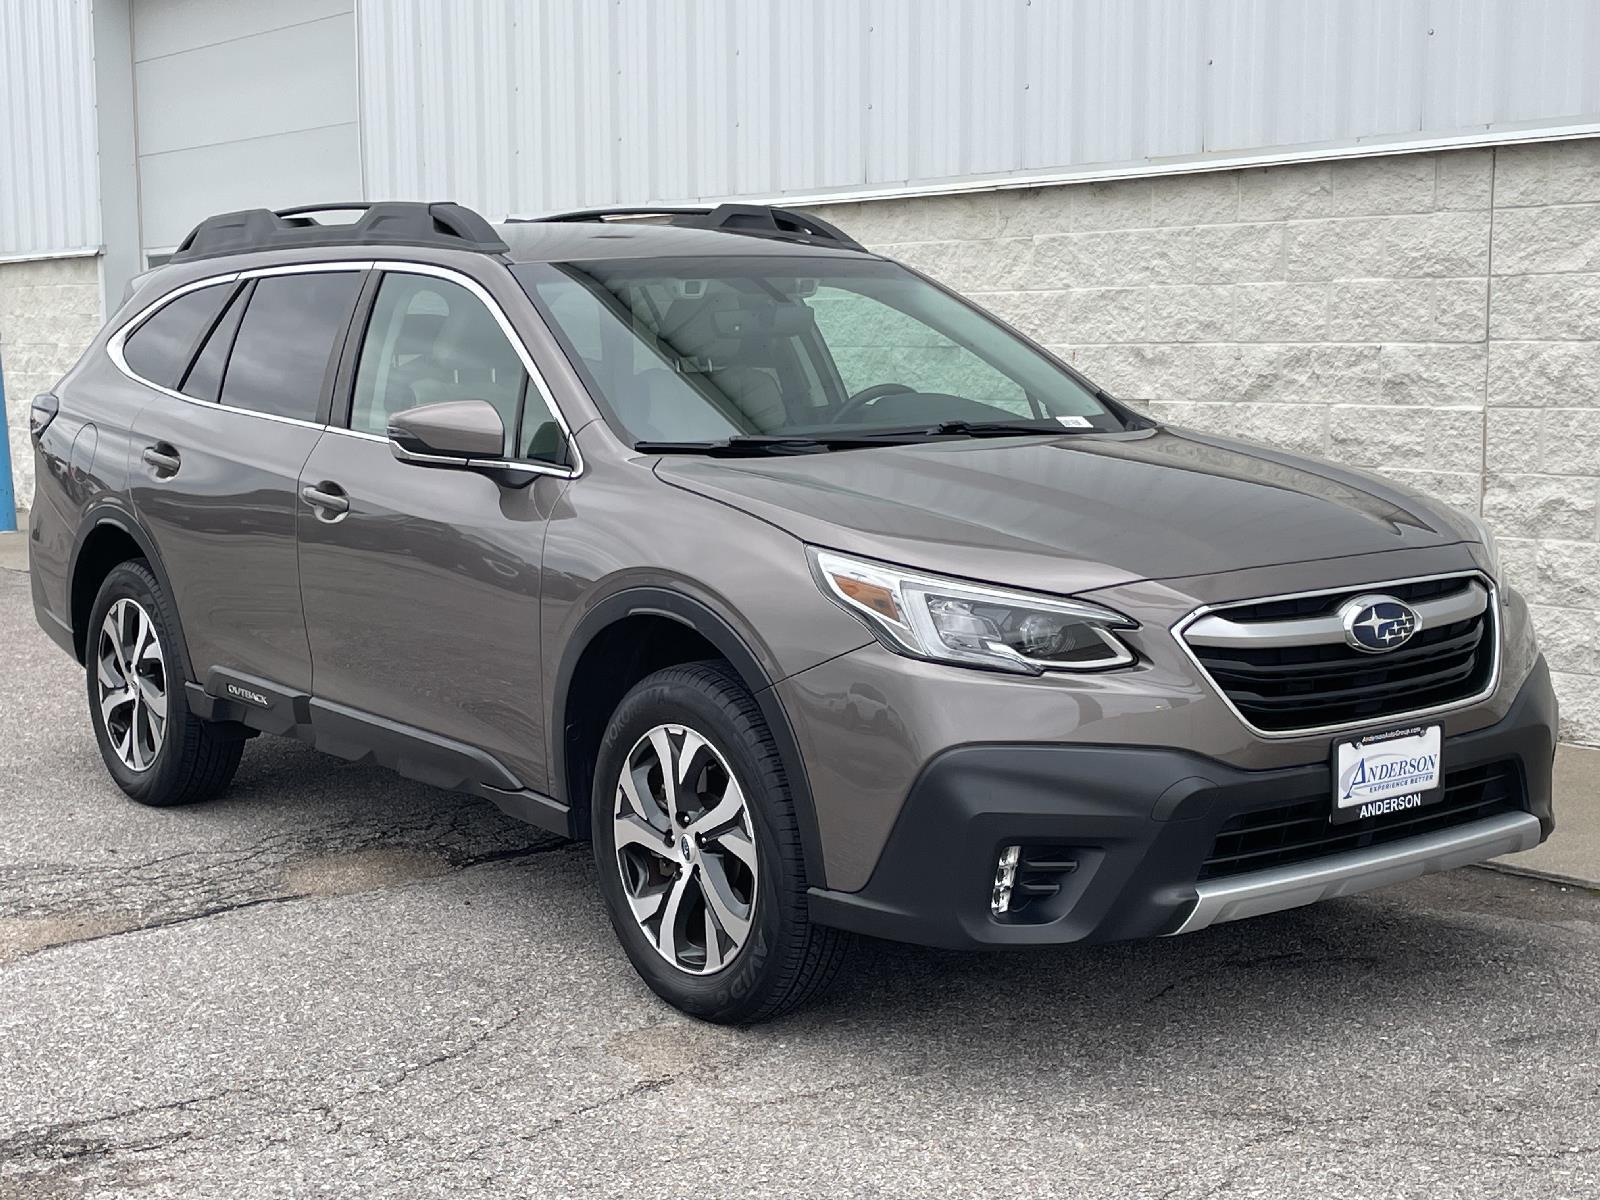 Used 2021 Subaru Outback Limited SUV for sale in Lincoln NE